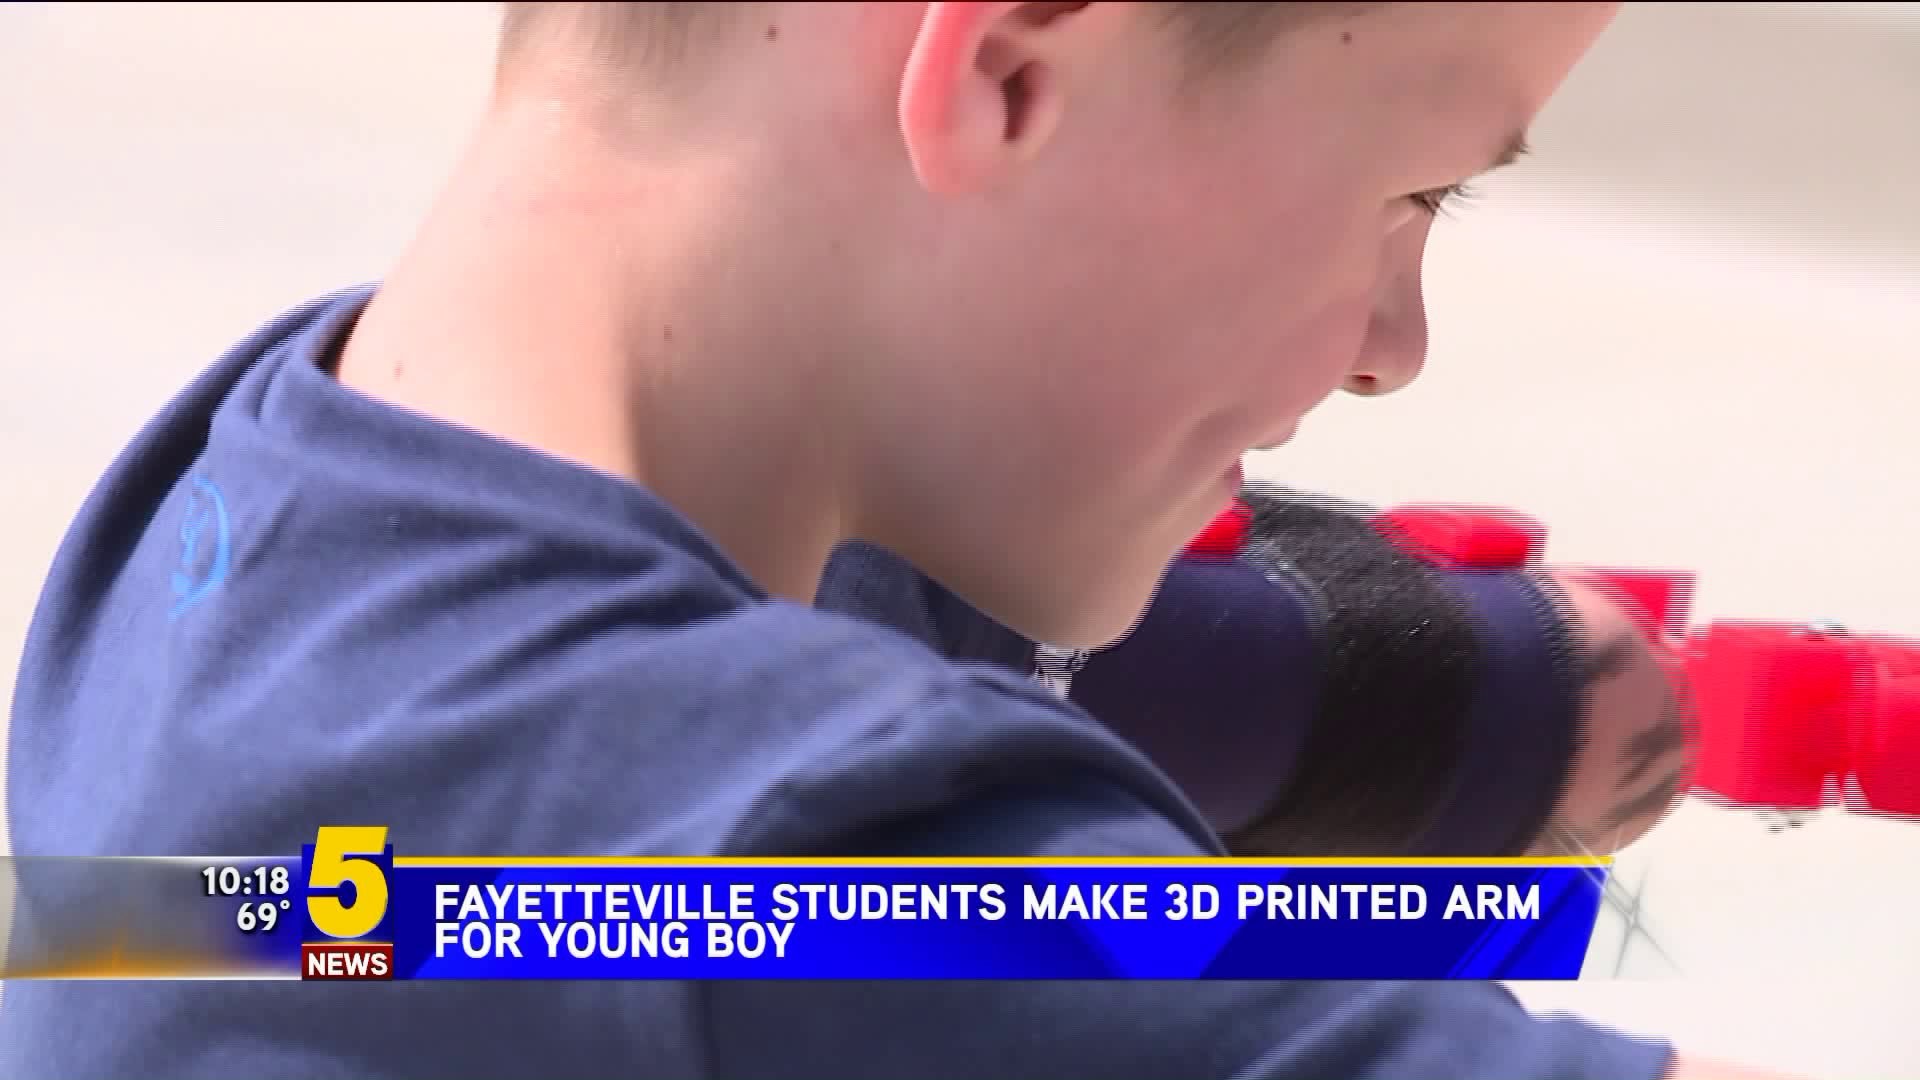 Fayetteville Students Make 3D Printed Arm For Young Boy